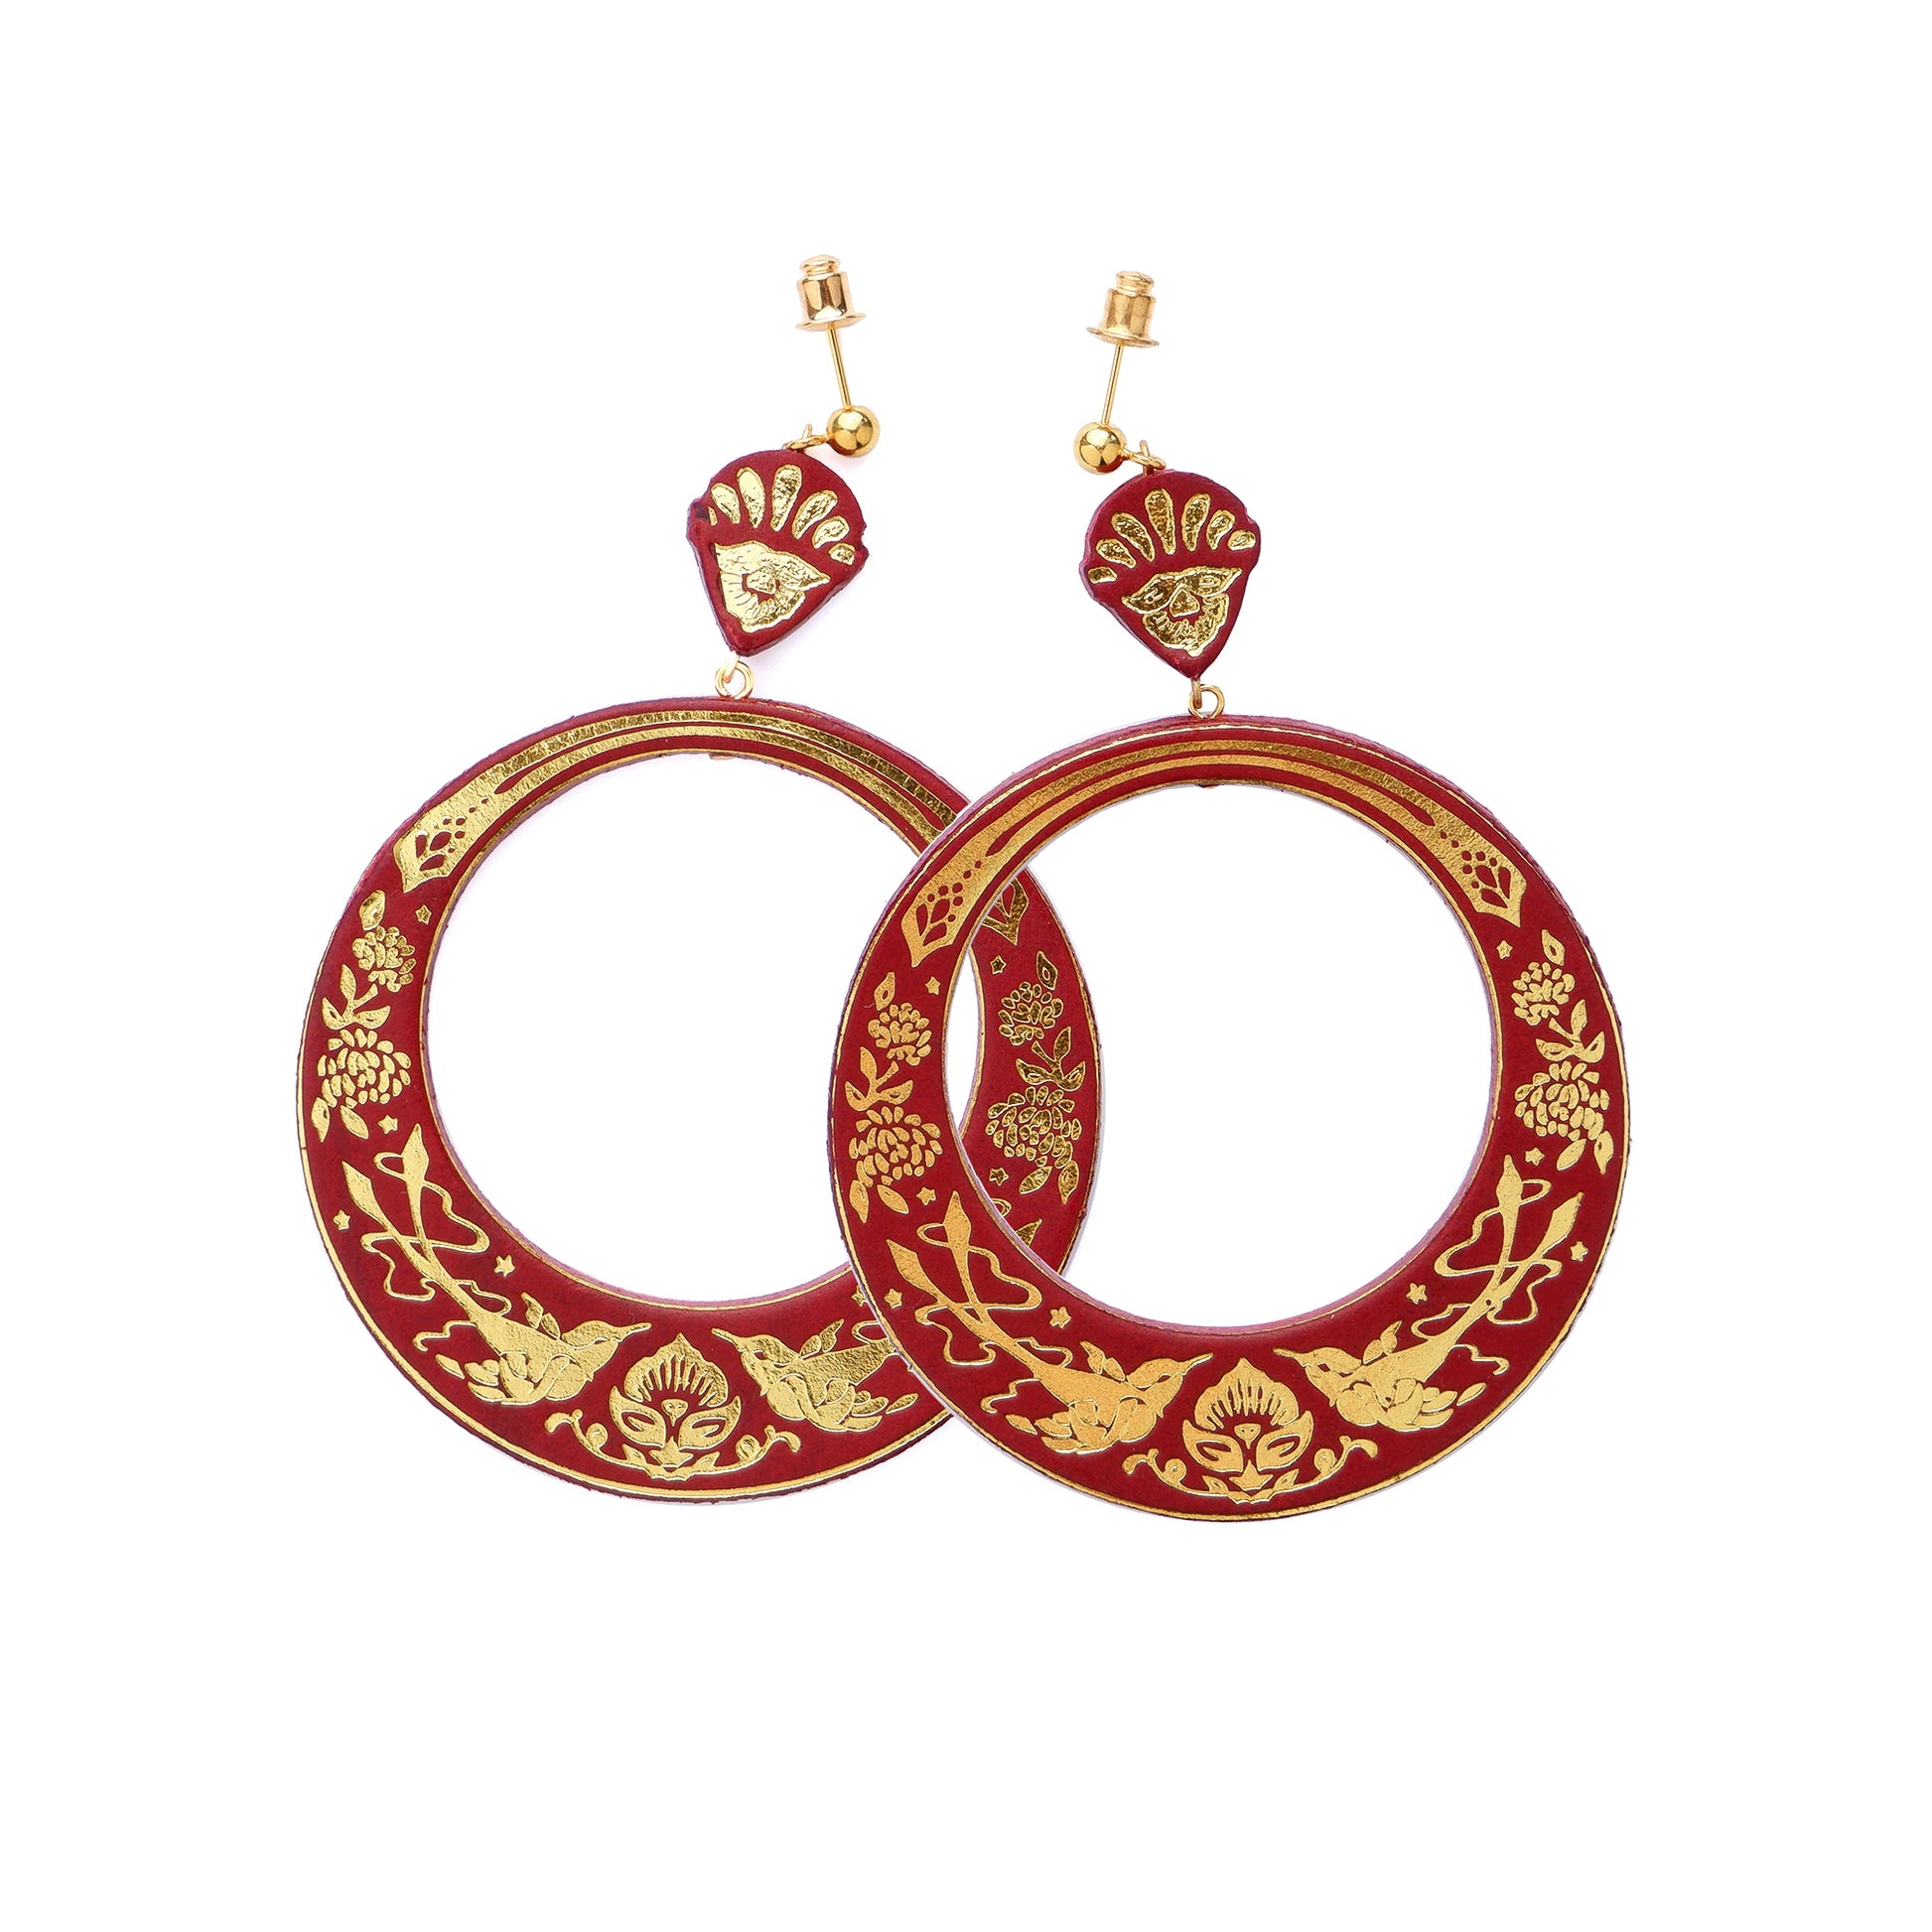 ox blood red leather hoop earrings with gold detailing